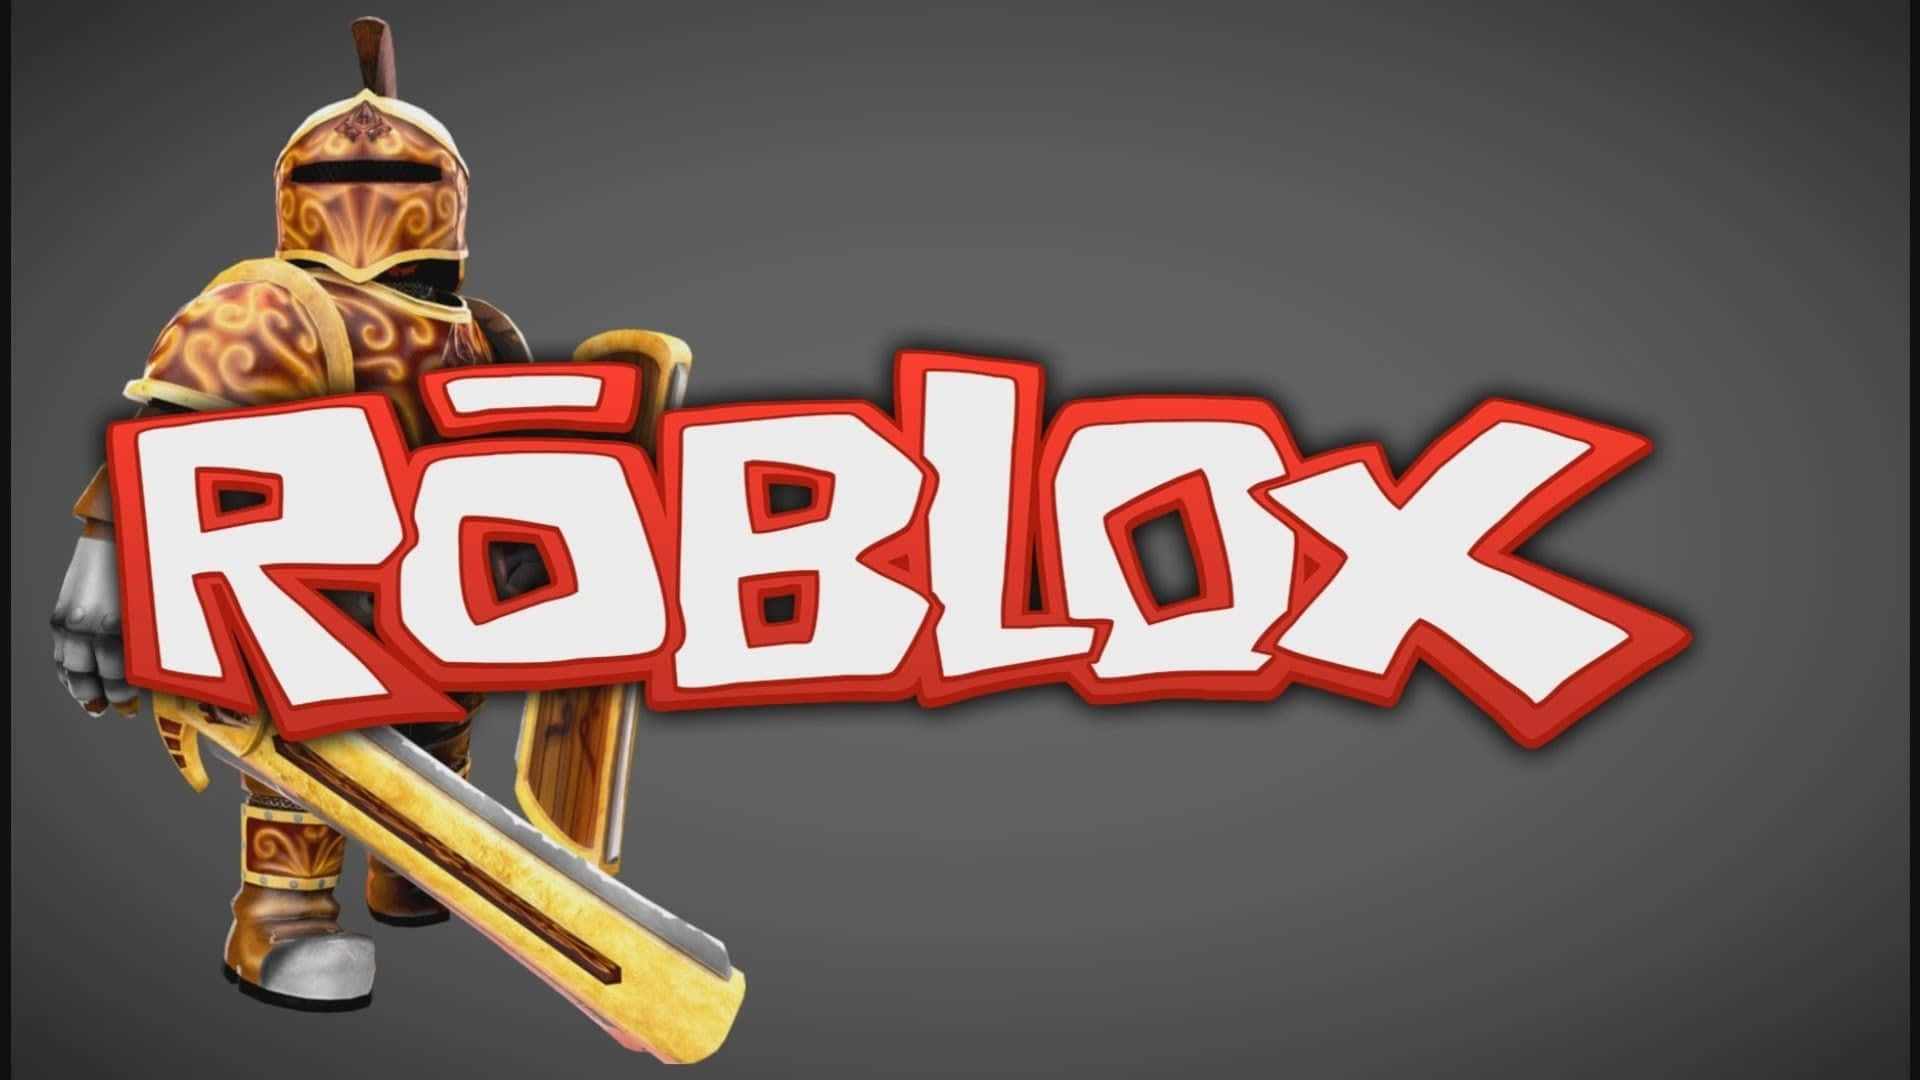 Roblox Logo And Knight Armor Wallpaper